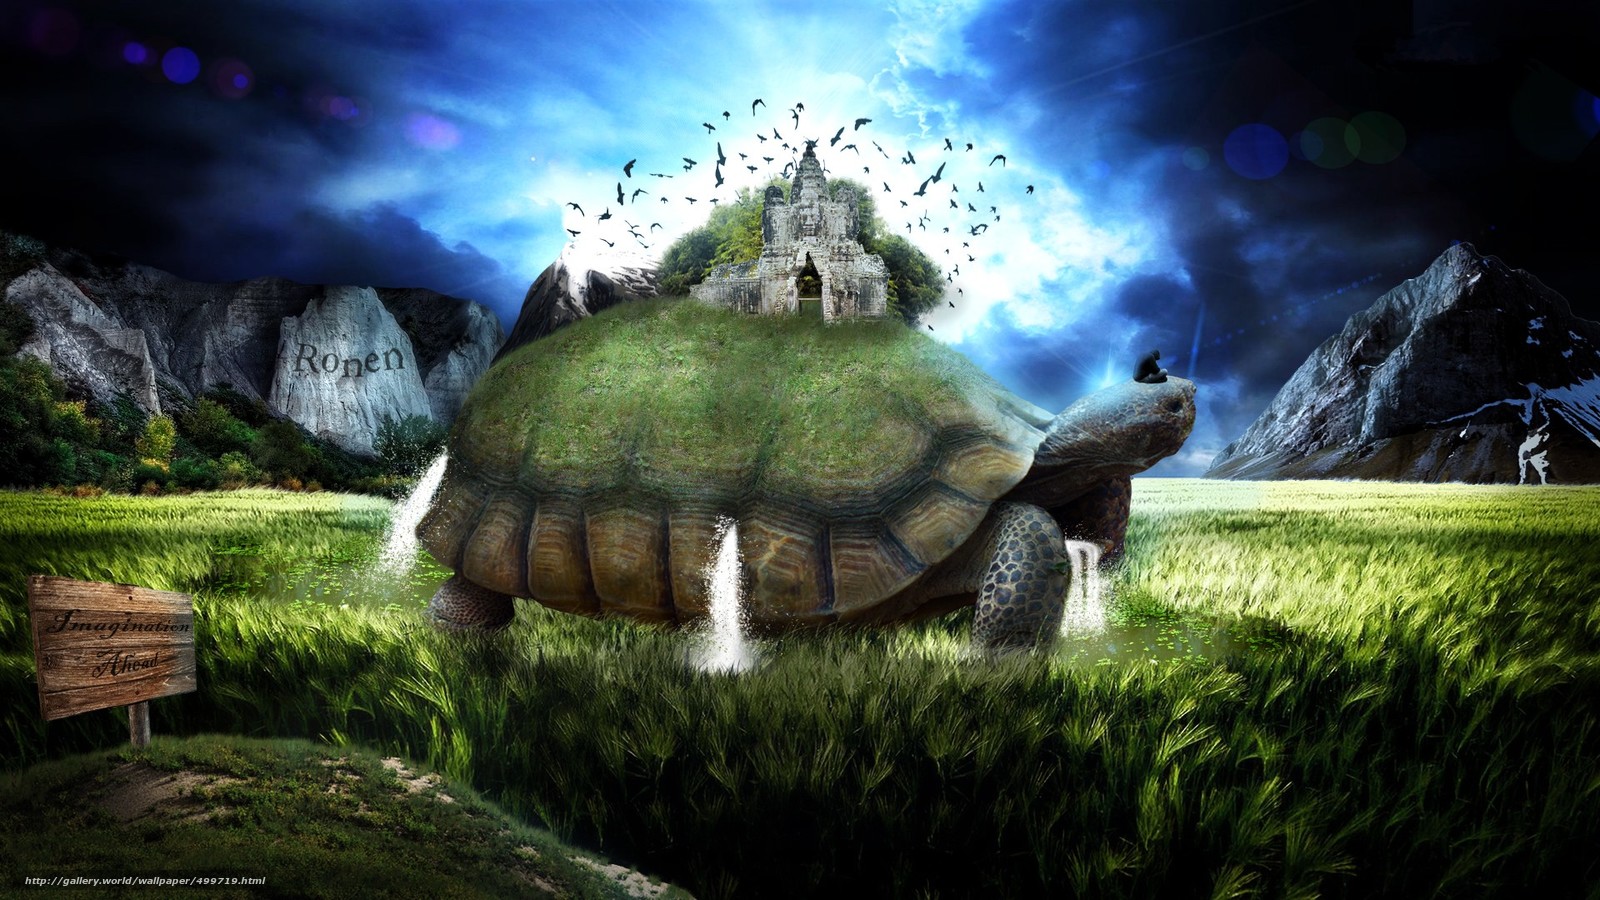 Download Tortoise wallpapers for mobile phone free Tortoise HD pictures